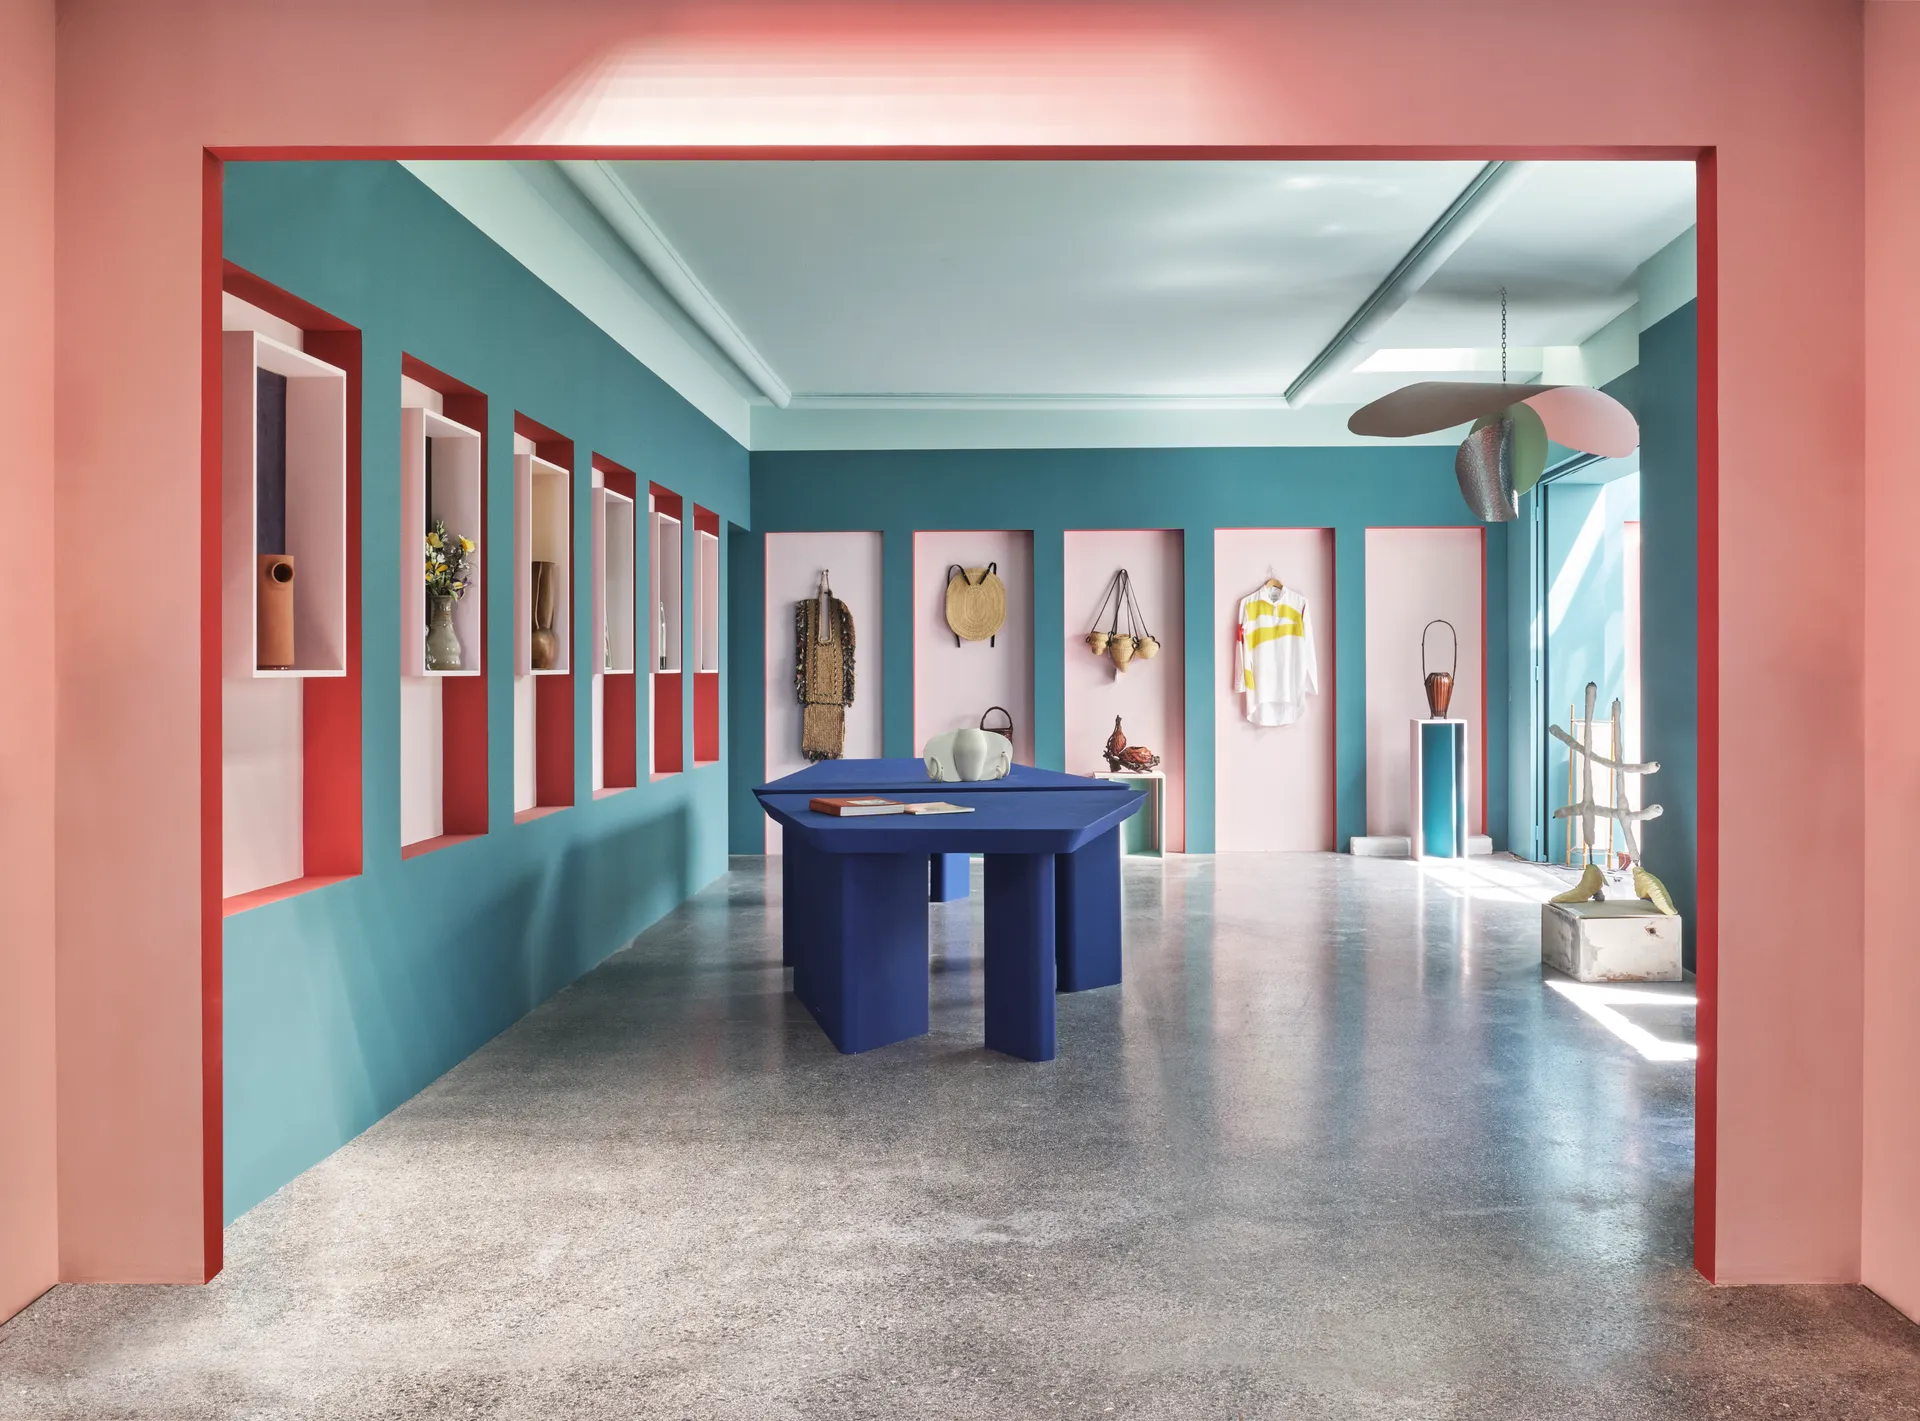 A retail space uses pink, blue, and red to color block, highlighting specific items on the walls